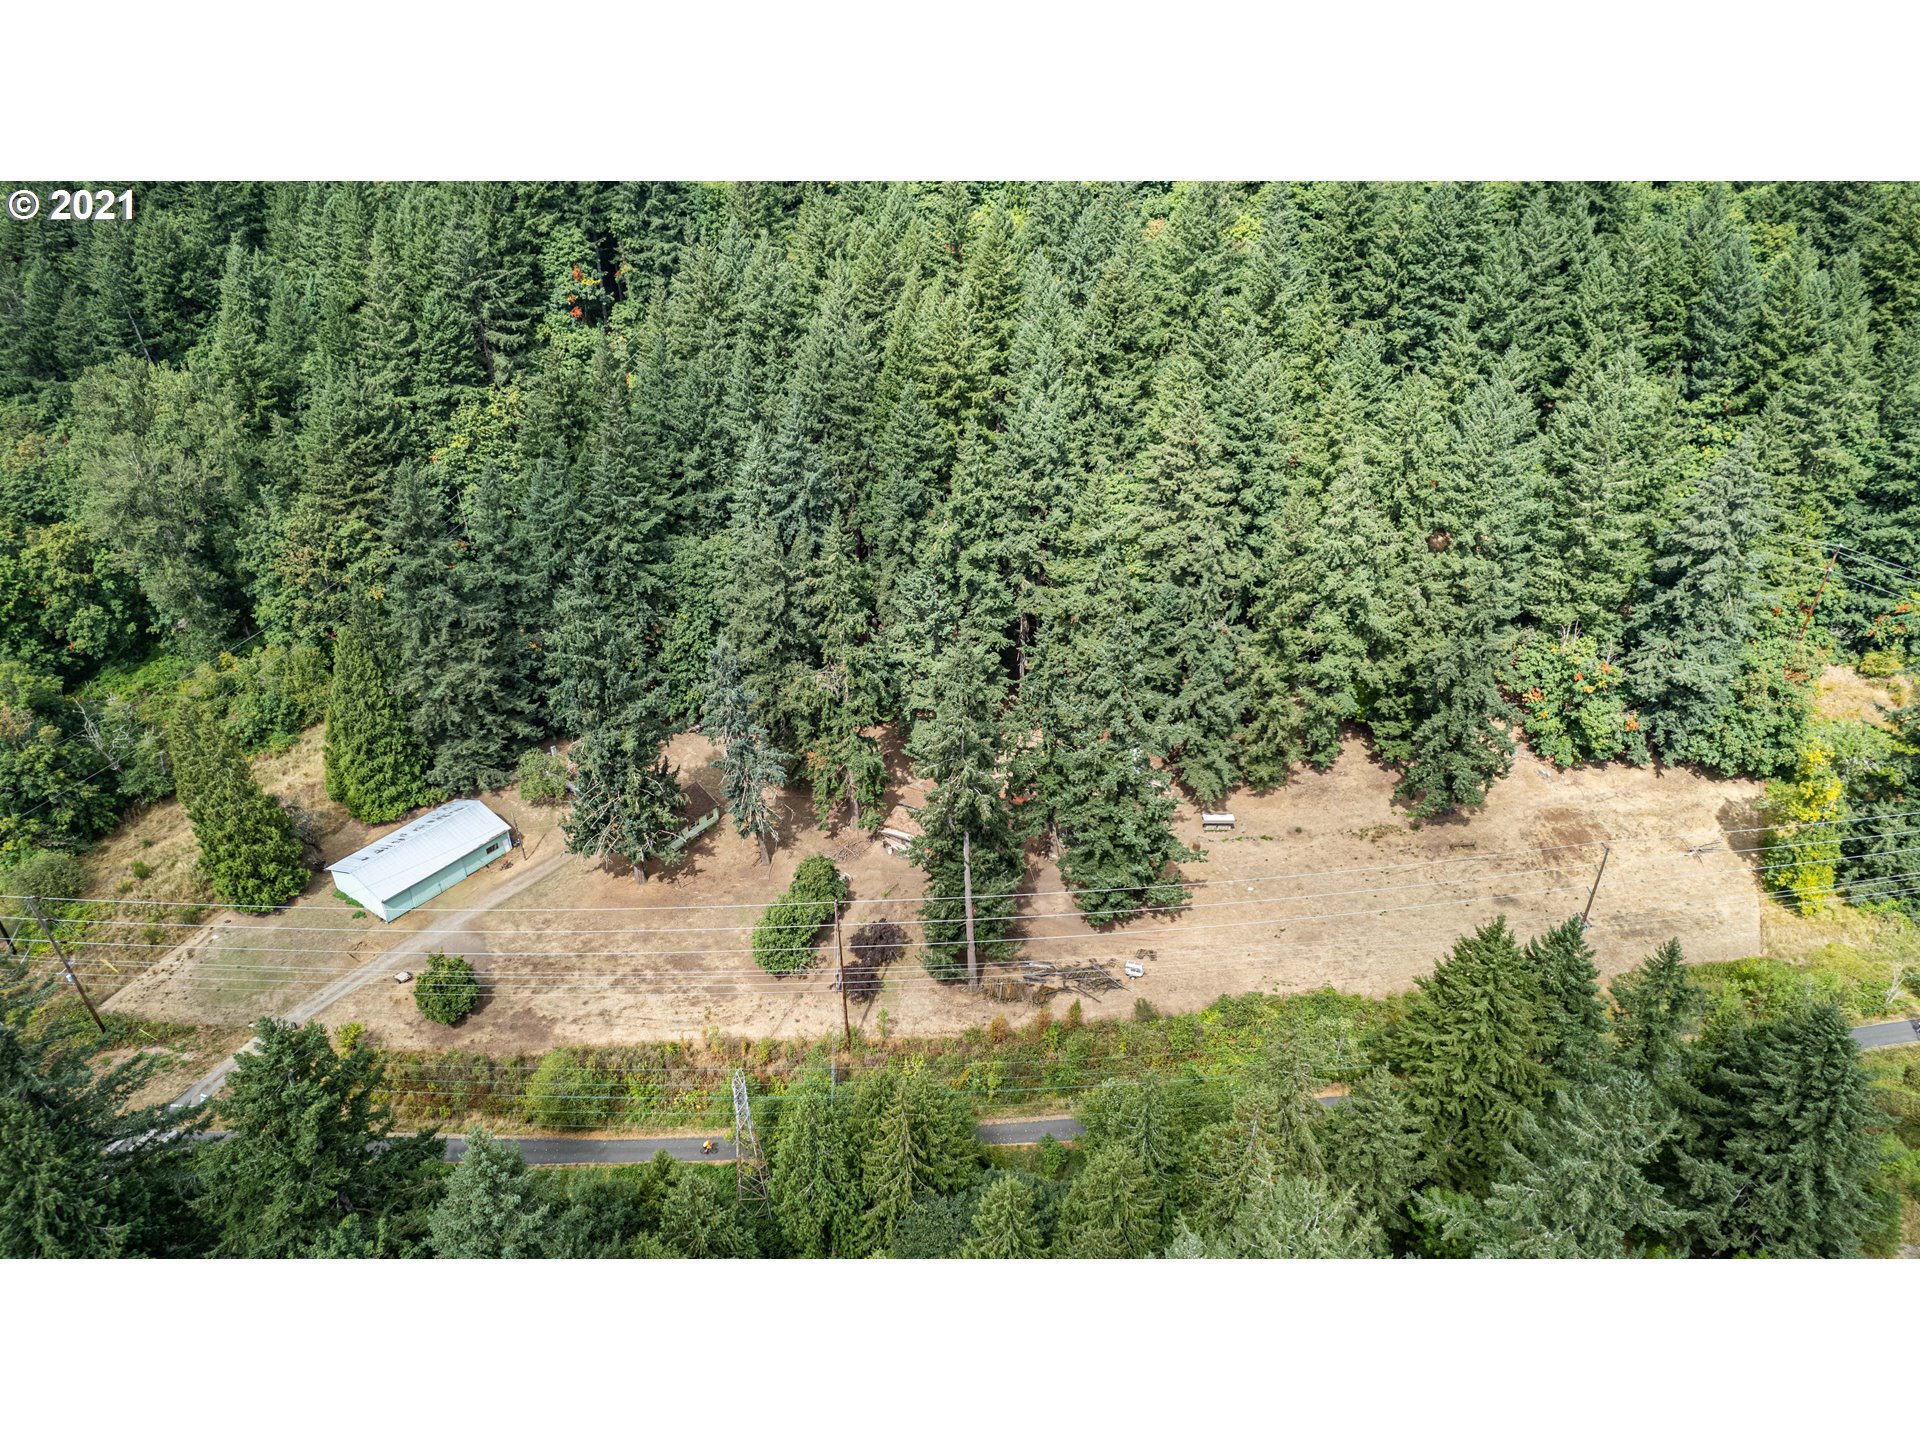 Estate property. Hobby farm on 4.72 fenced acres (3 tax lots) in the city just off the Springwater corridor & backs up to Powell Butte Nature Park. 36x60 shop for all your toys. Low taxes with farm tax deferral. Sheep on property. Bring your horses. House is a fixer - make it your dream. Newer drain field. Lots of possibilities and mature trees on property. Investment/ Investors/developers? Buyer to do own due diligence. Sold AS/IS. Appointment Only.